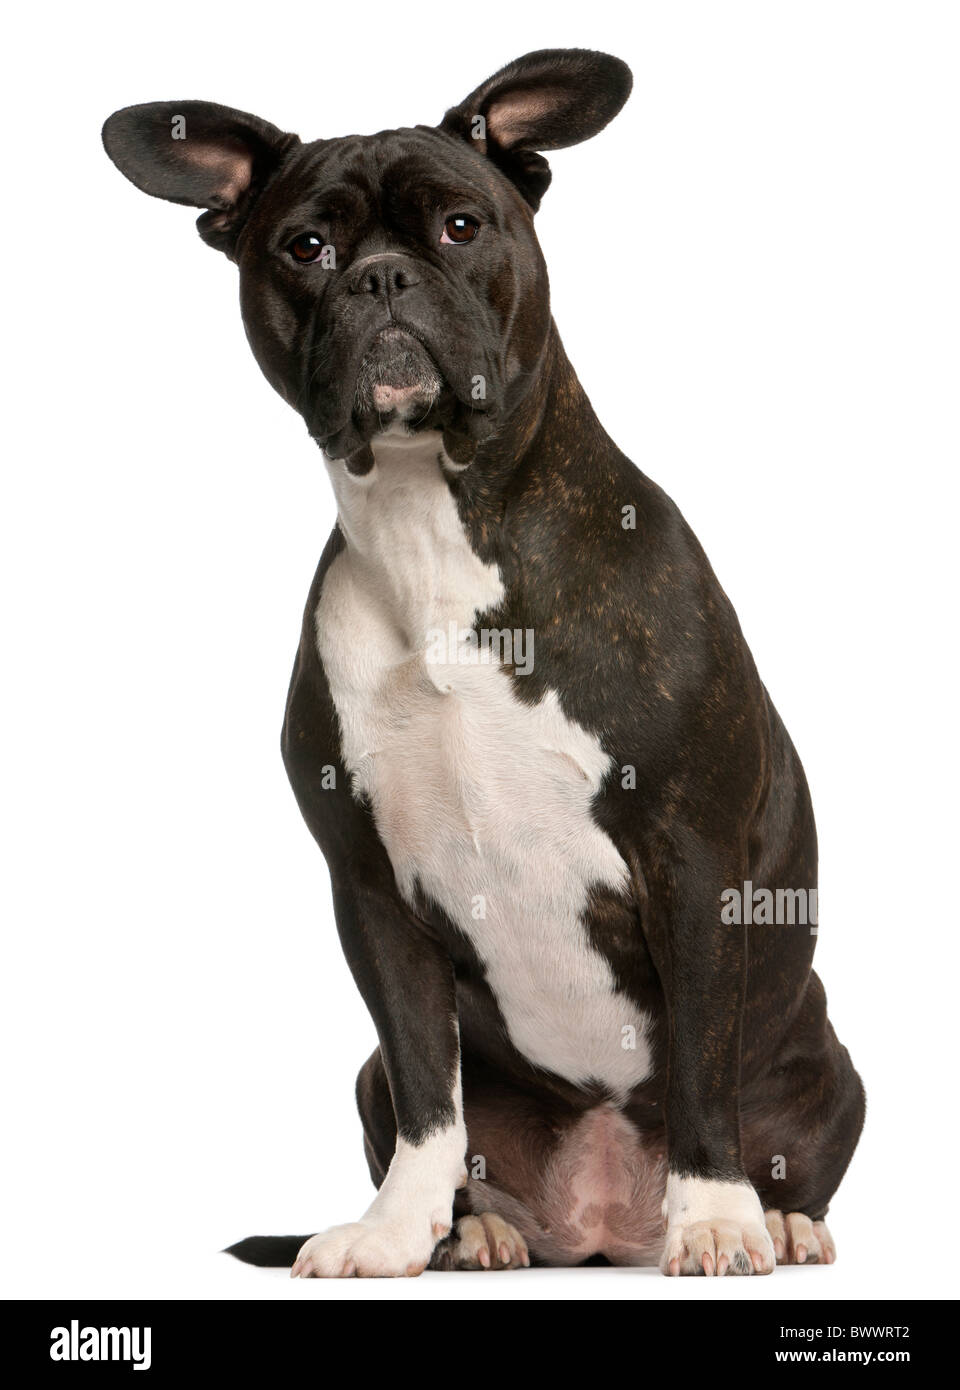 Mixed-breed dog, 3 years old, sitting in front of white background Stock Photo